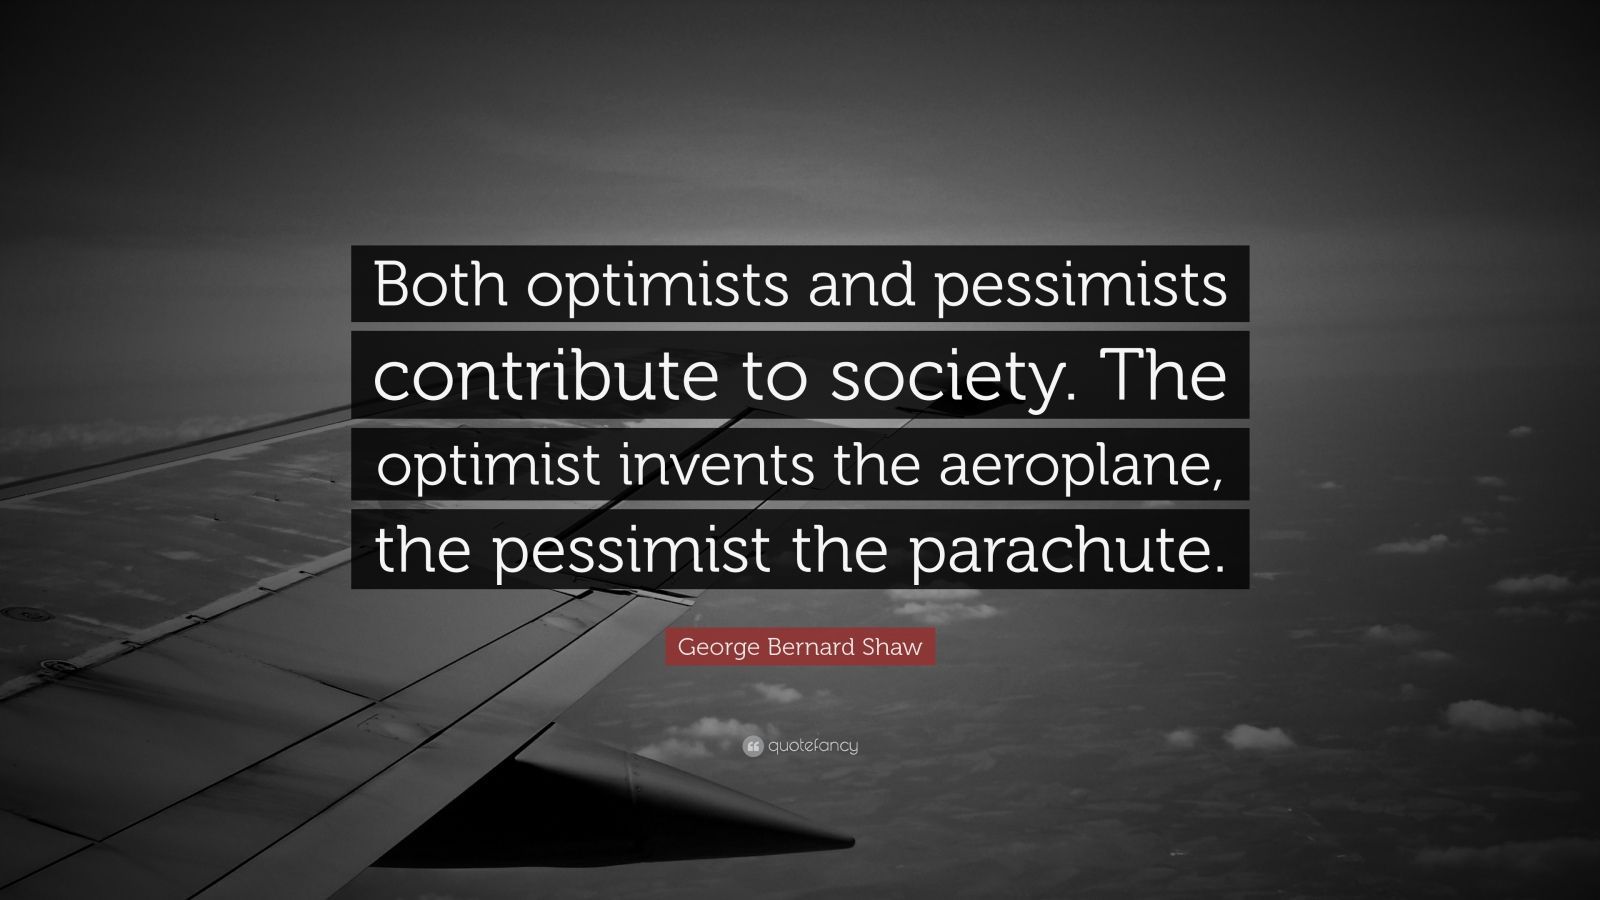 George Bernard Shaw Quote: “Both optimists and pessimists contribute to society. The optimist. George bernard shaw quotes, George carlin, Entrepreneurship quotes